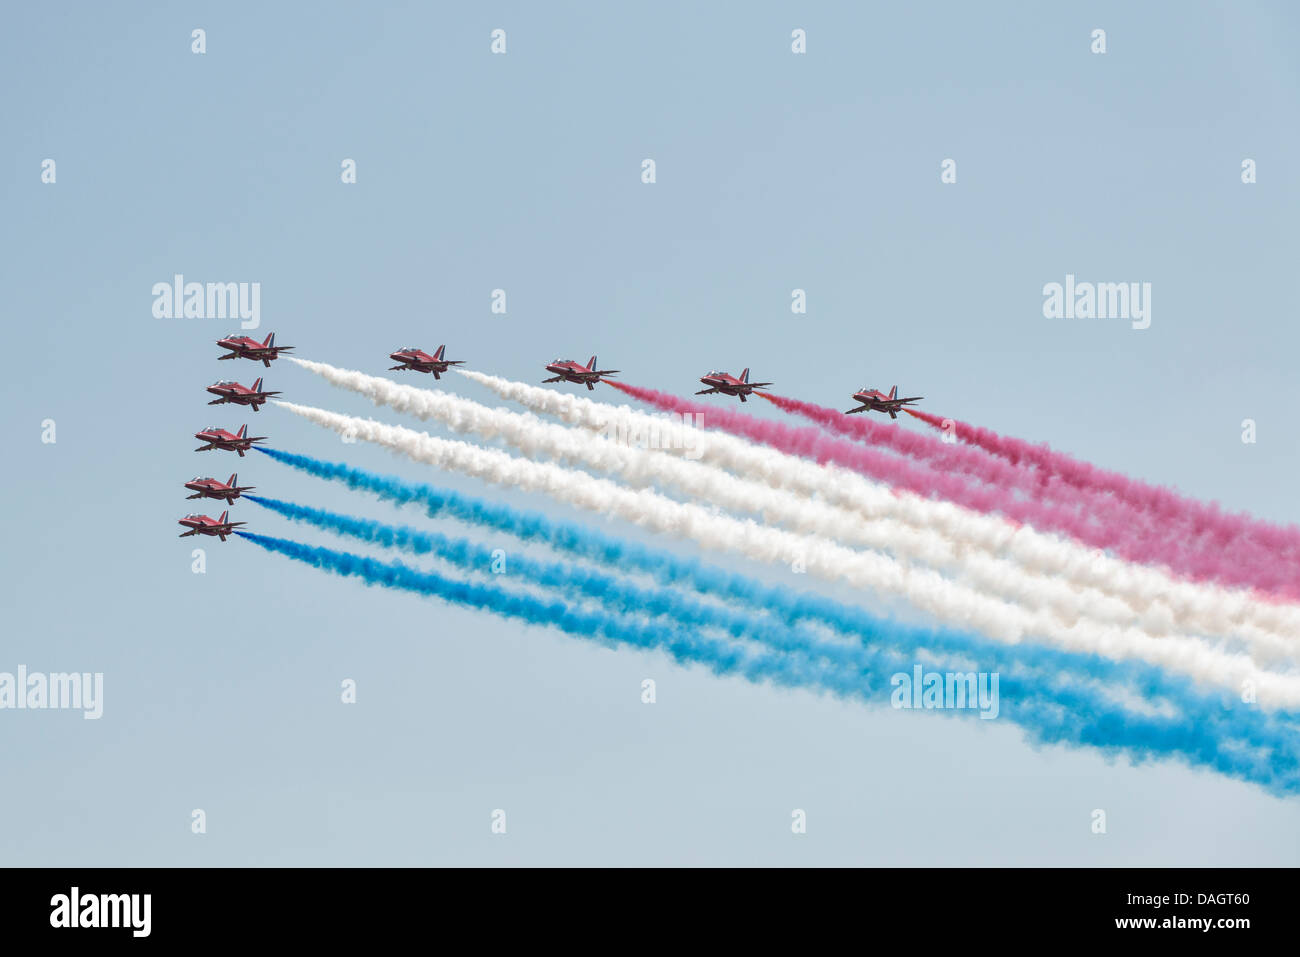 The British Royal Air Force Red Arrows Military Aerobatic Display Team arrive at RAF Waddington in Big Battle Formation Stock Photo